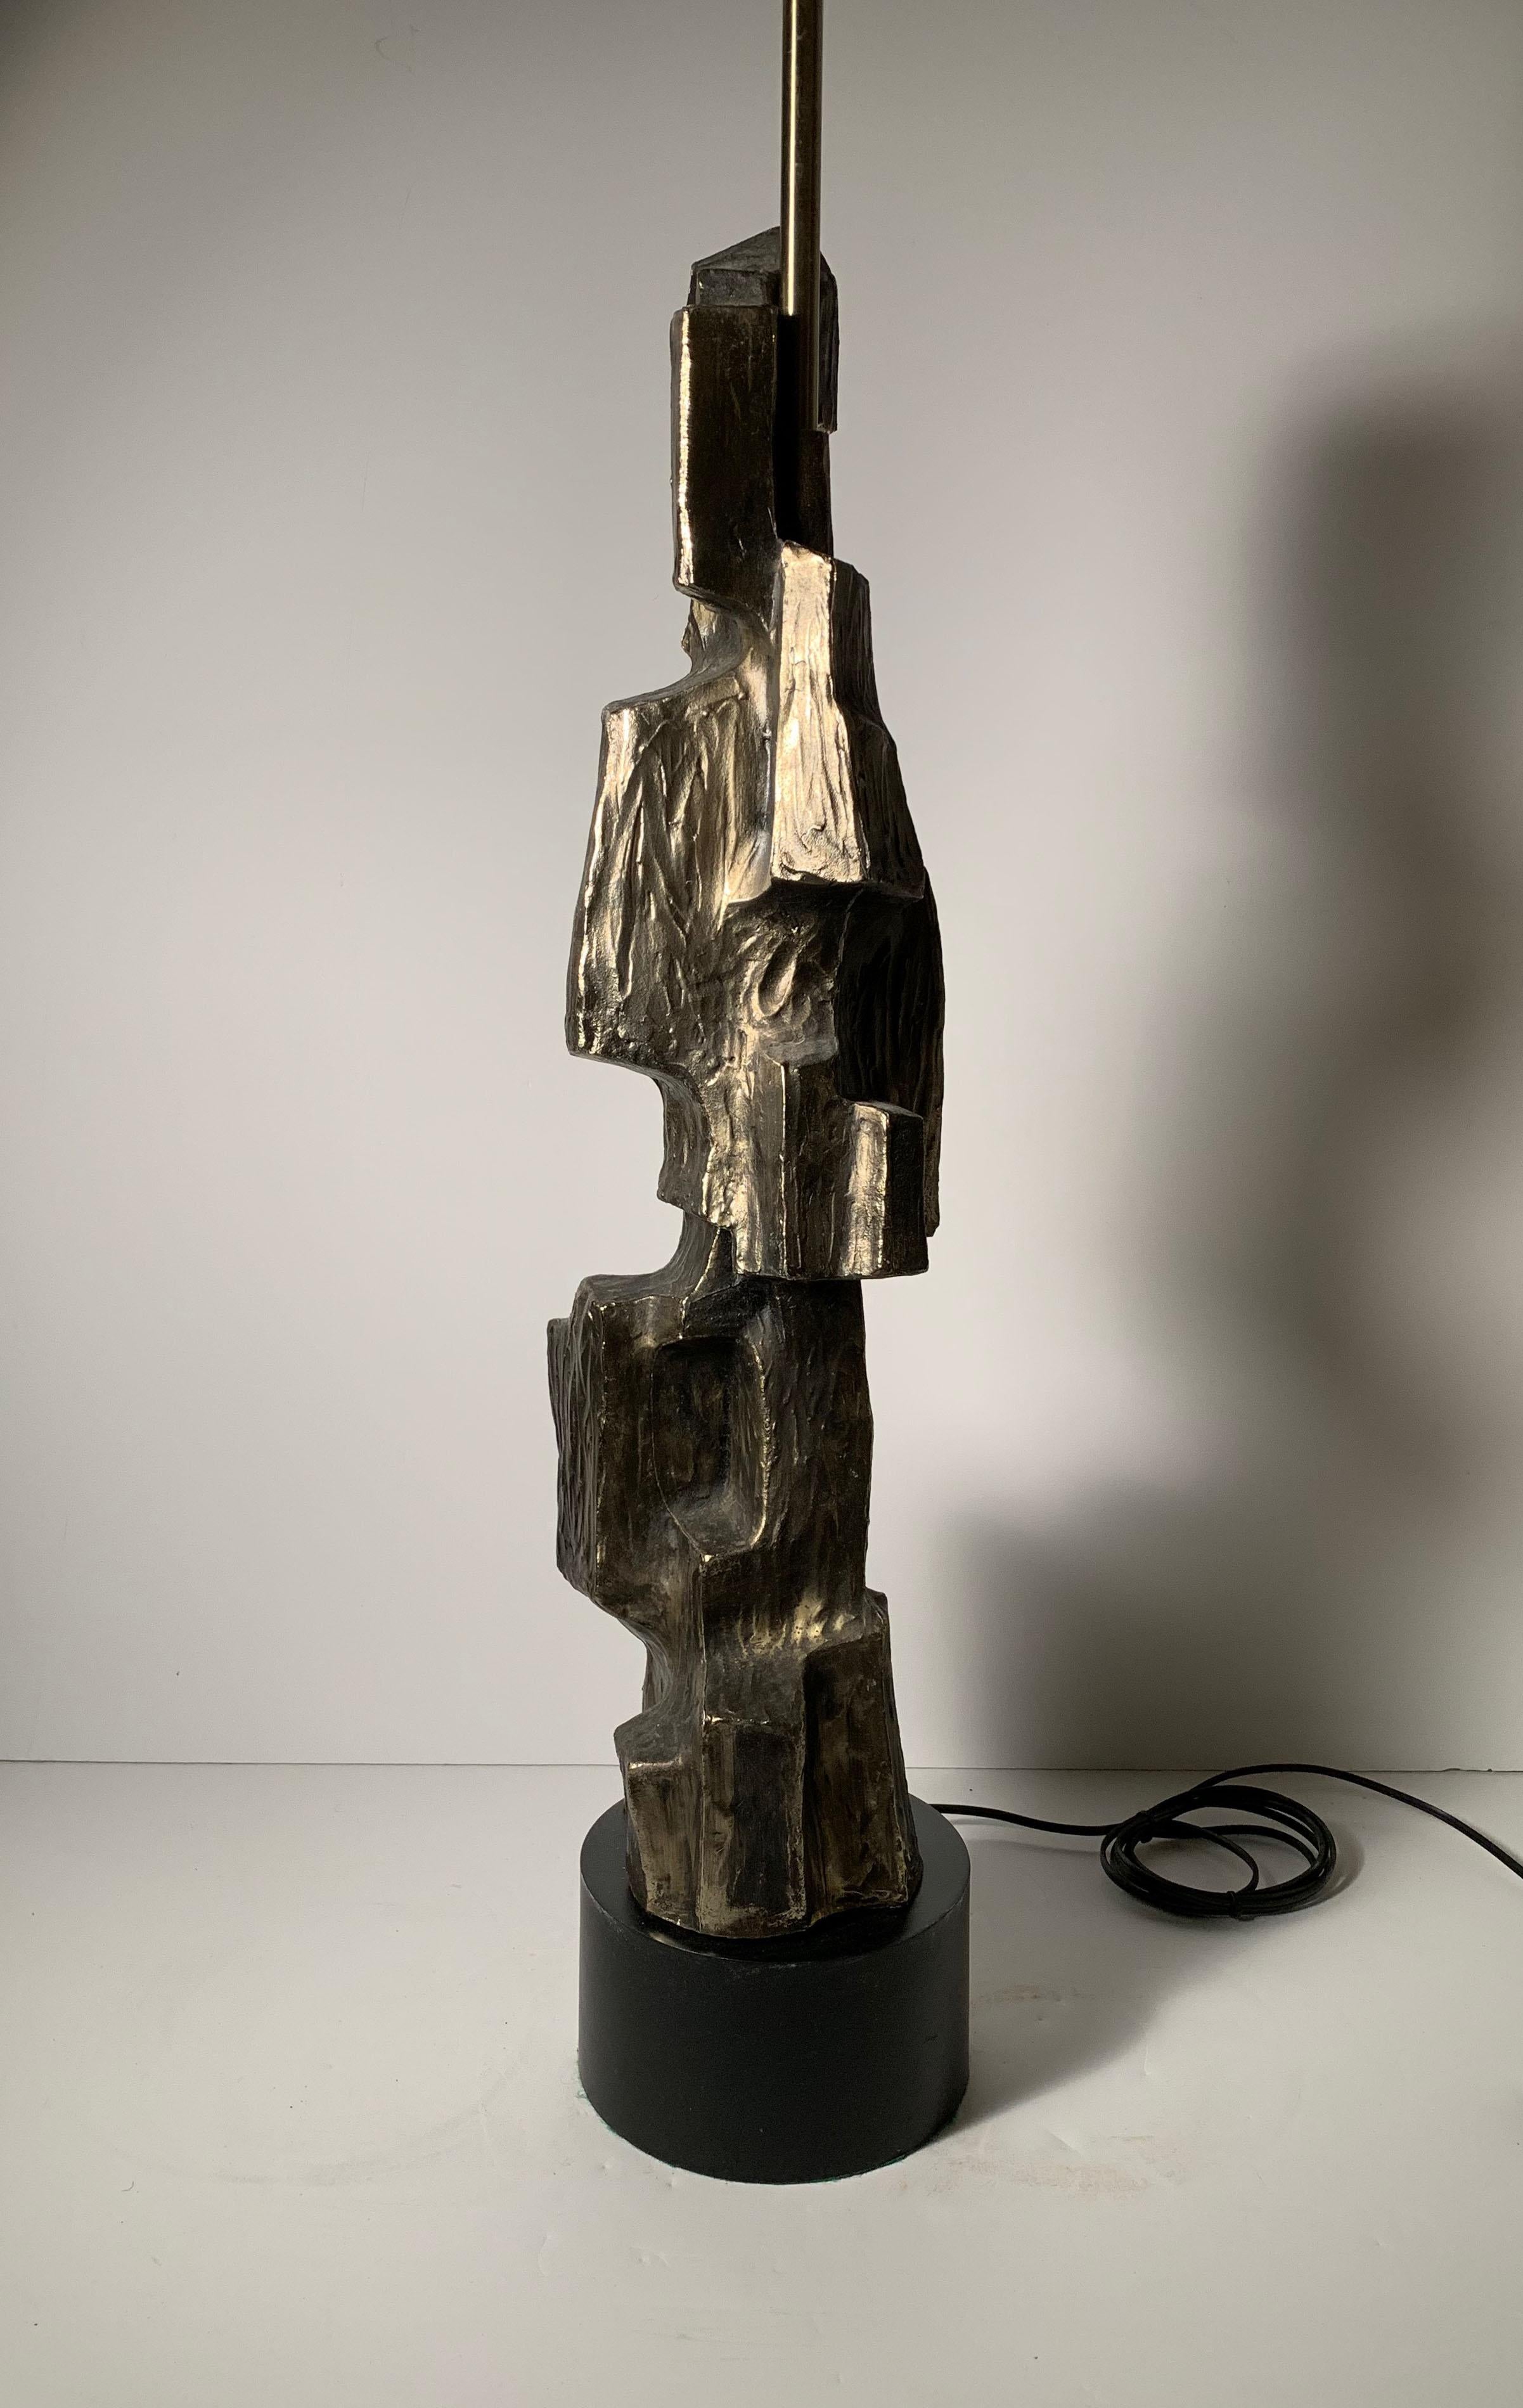 Large Brutalist Cubist Table Lamp by Richard Barr for Laurel Lamp company in the style of Paul Evans.